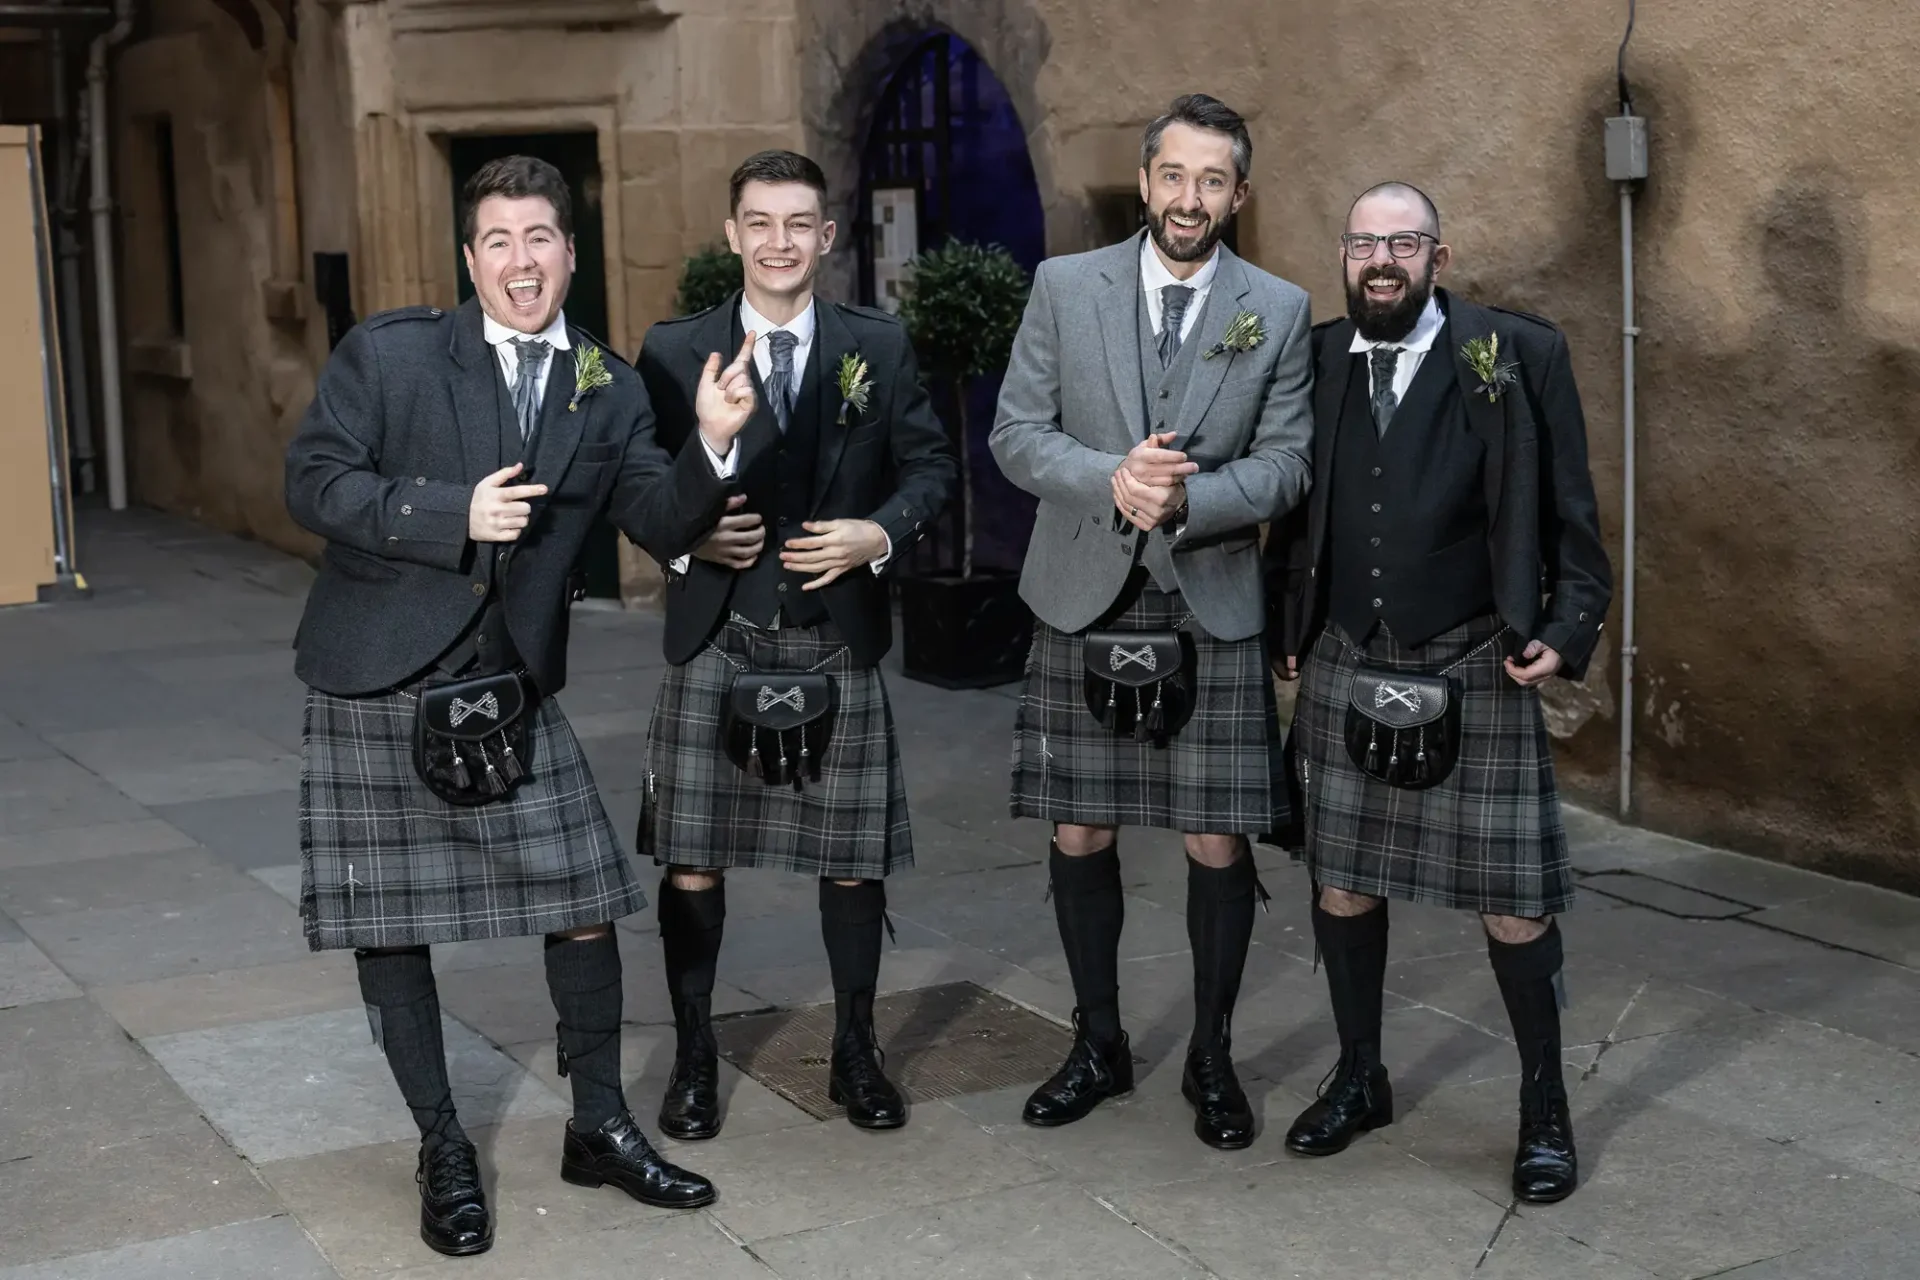 Four men in traditional scottish kilts and jackets, laughing and posing together at an outdoor event.